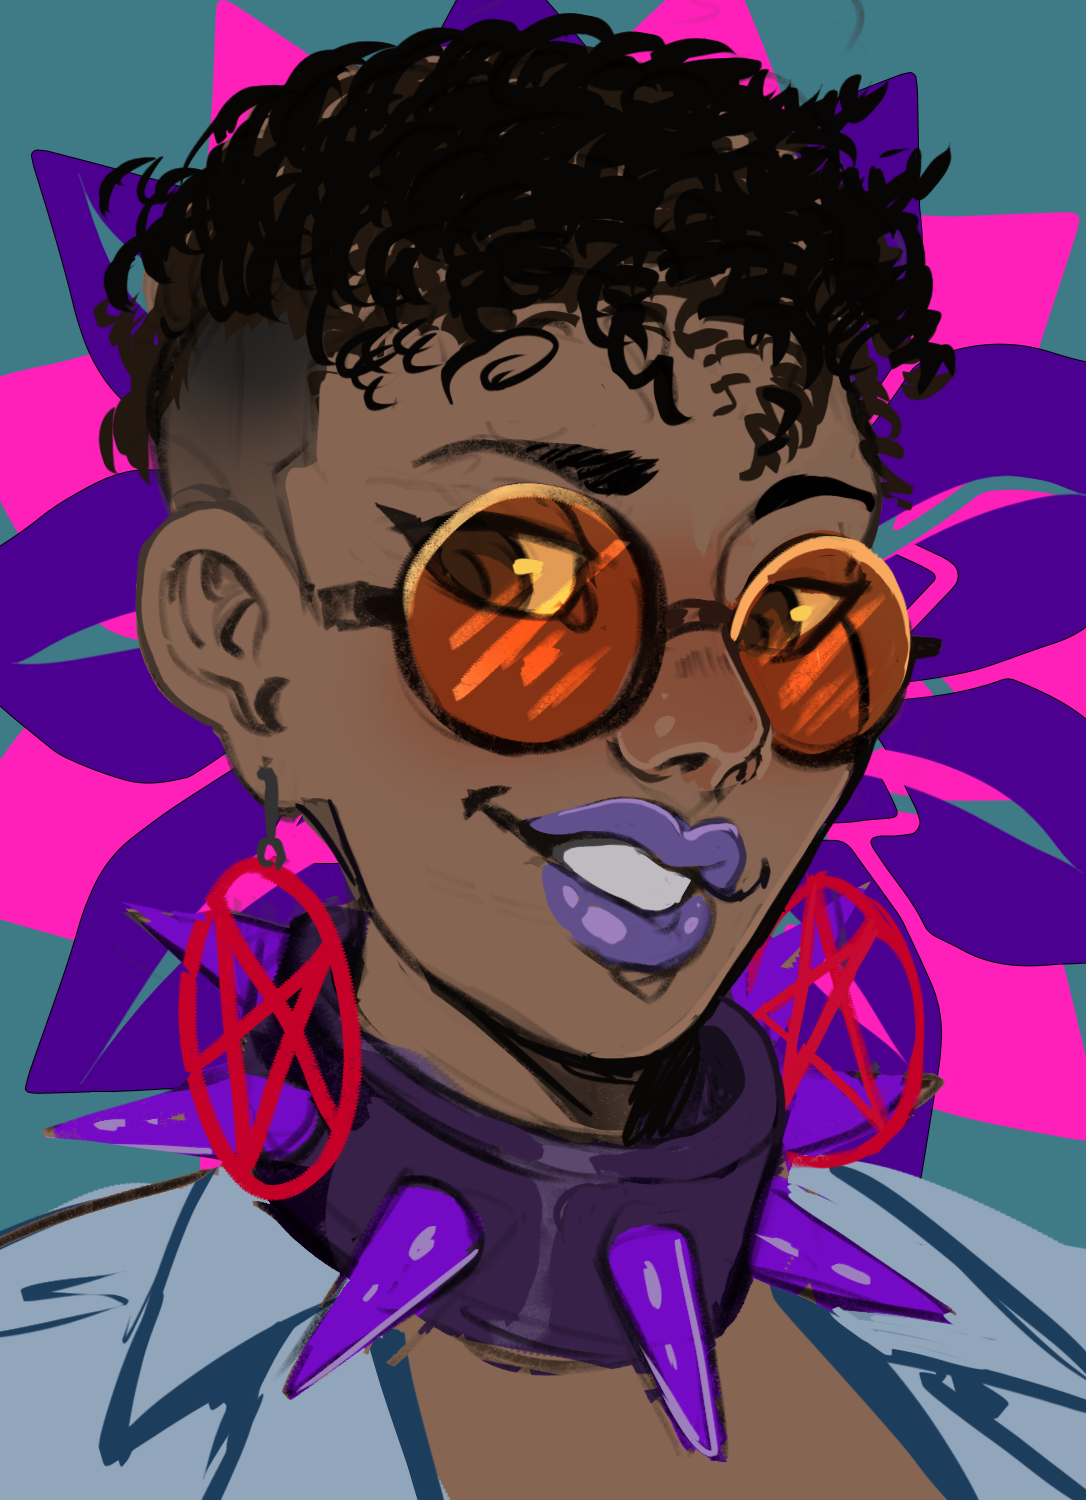 a drawn image of Nova. She's smiling and wearing tinted round glasses, pentacle earrings, and a large spiked choker